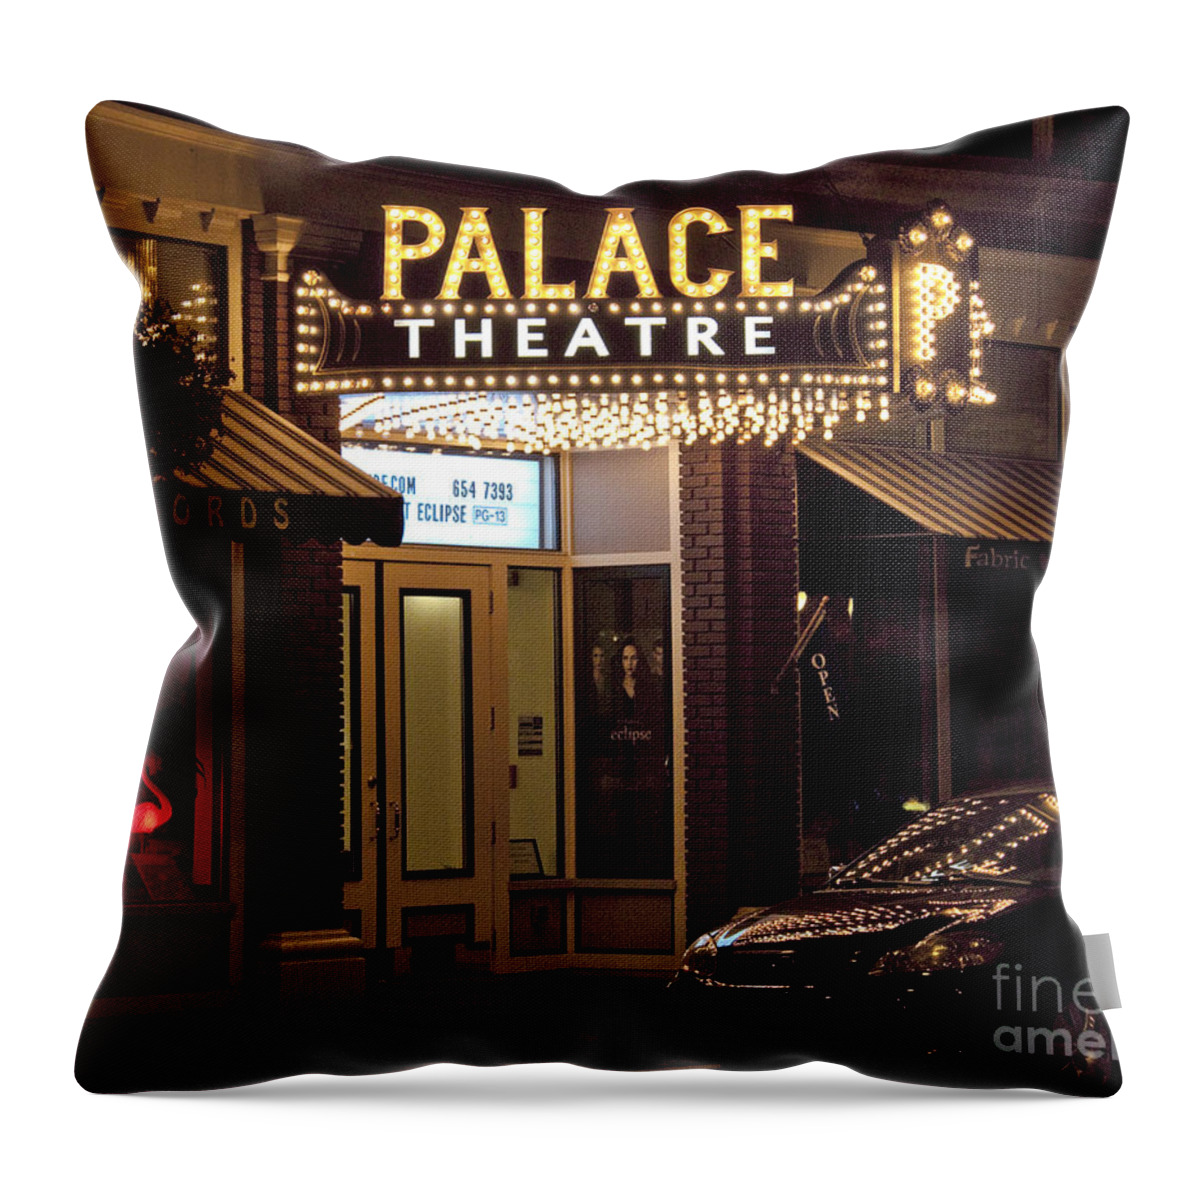 Corning Palace Theatre Throw Pillow featuring the photograph Corning Palace Theatre by Tom Doud